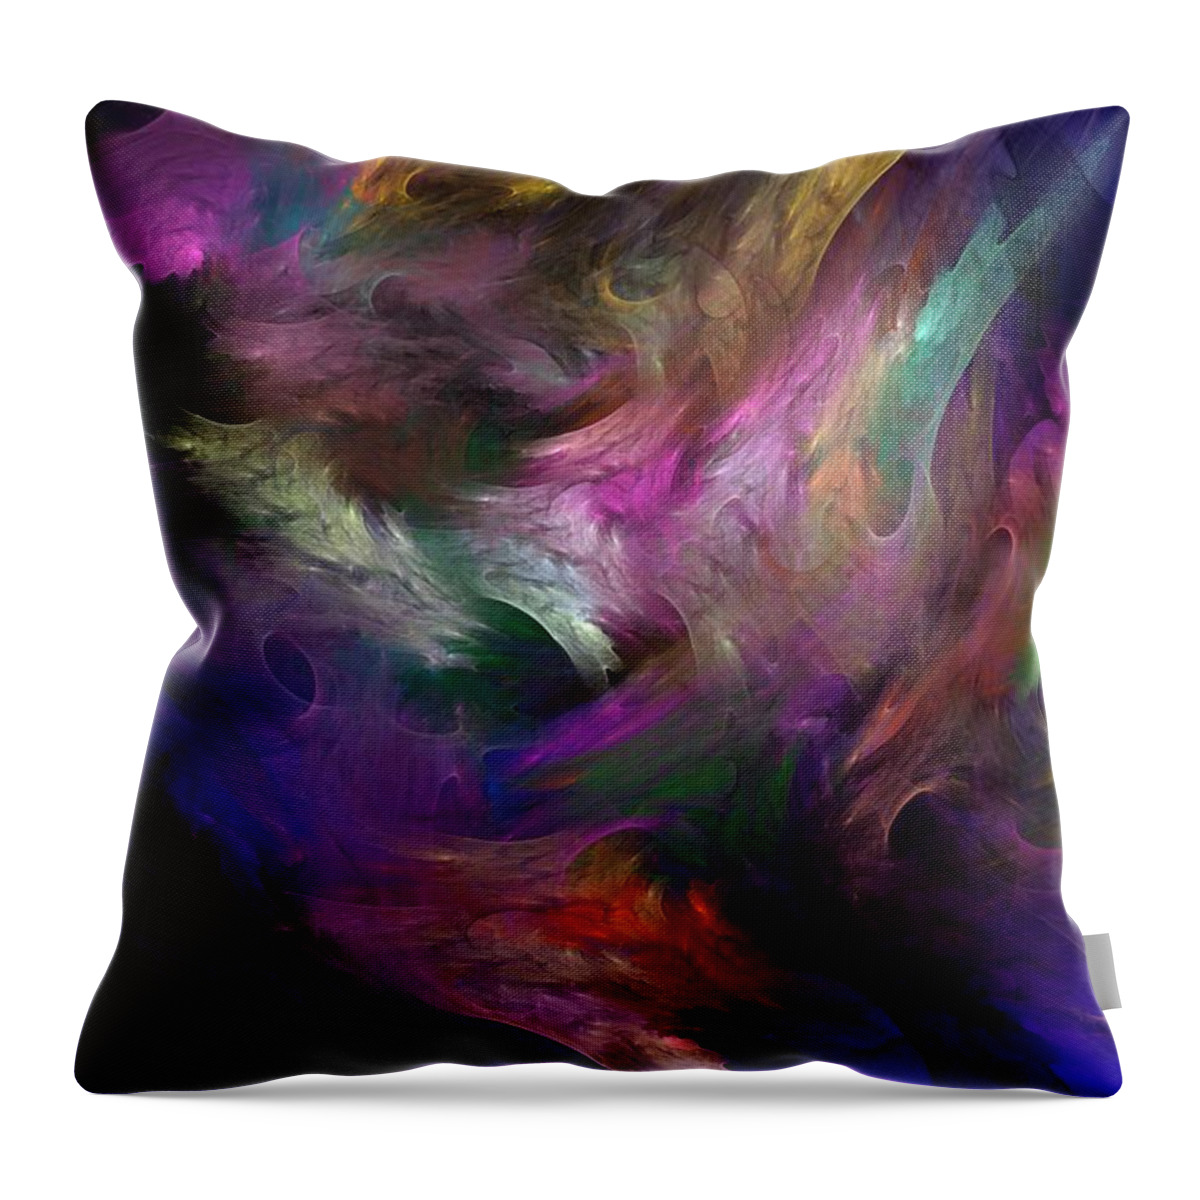 Fantasy Throw Pillow featuring the digital art Untitled 01-12-10 by David Lane